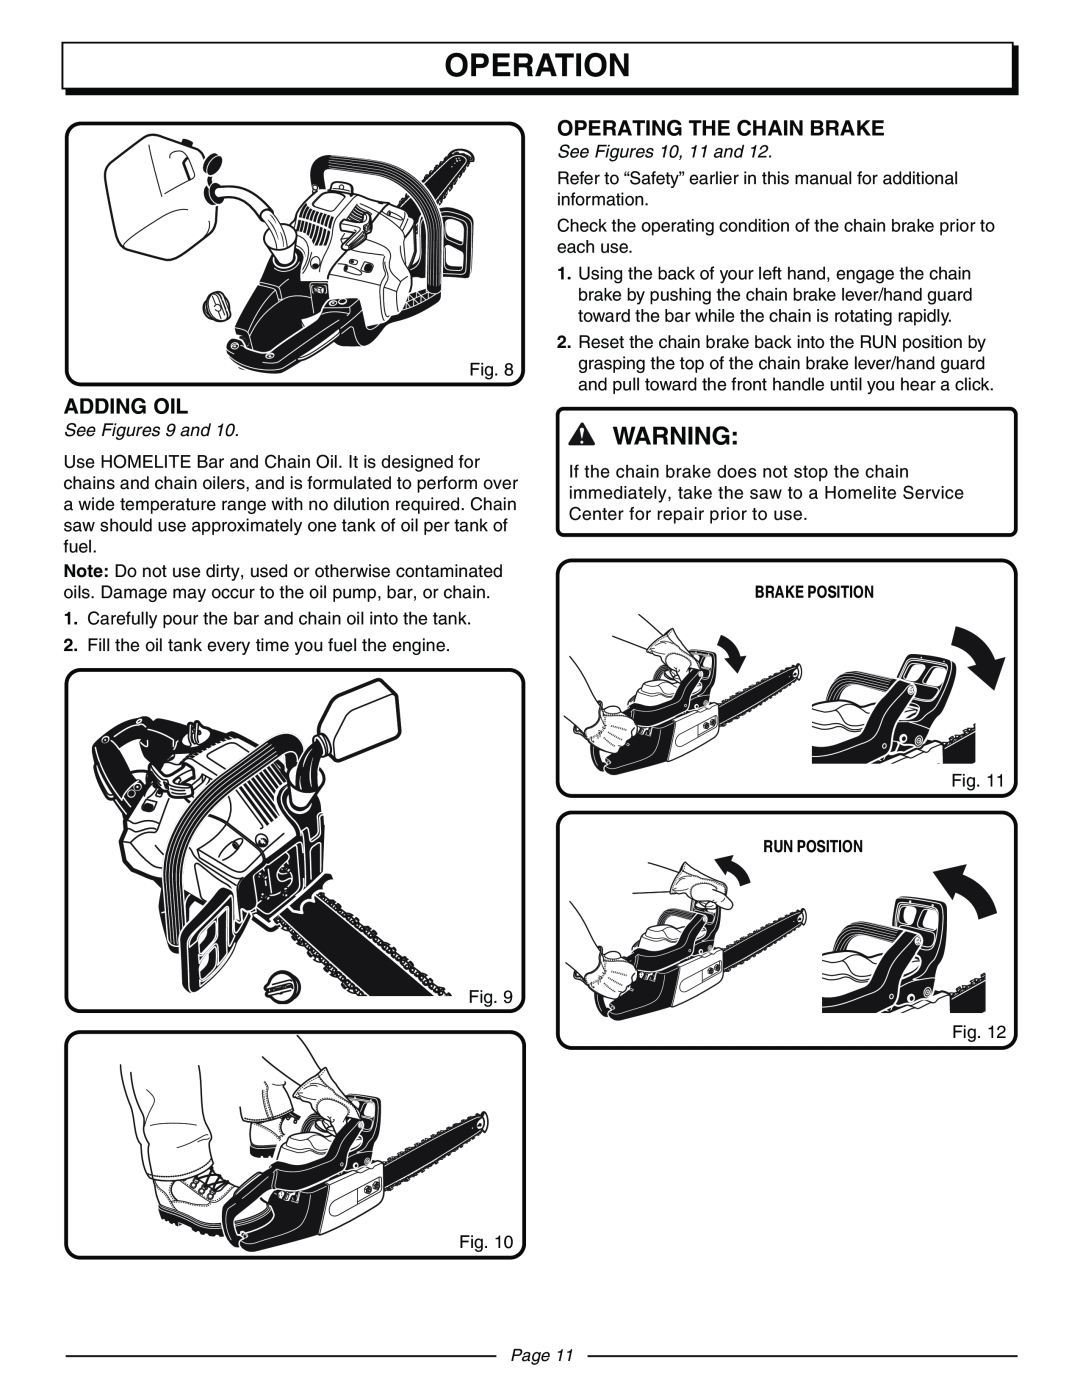 Homelite UT10570 manual Adding Oil, Operating The Chain Brake, Operation, See Figures 9 and, See Figures 10, 11 and, Page 